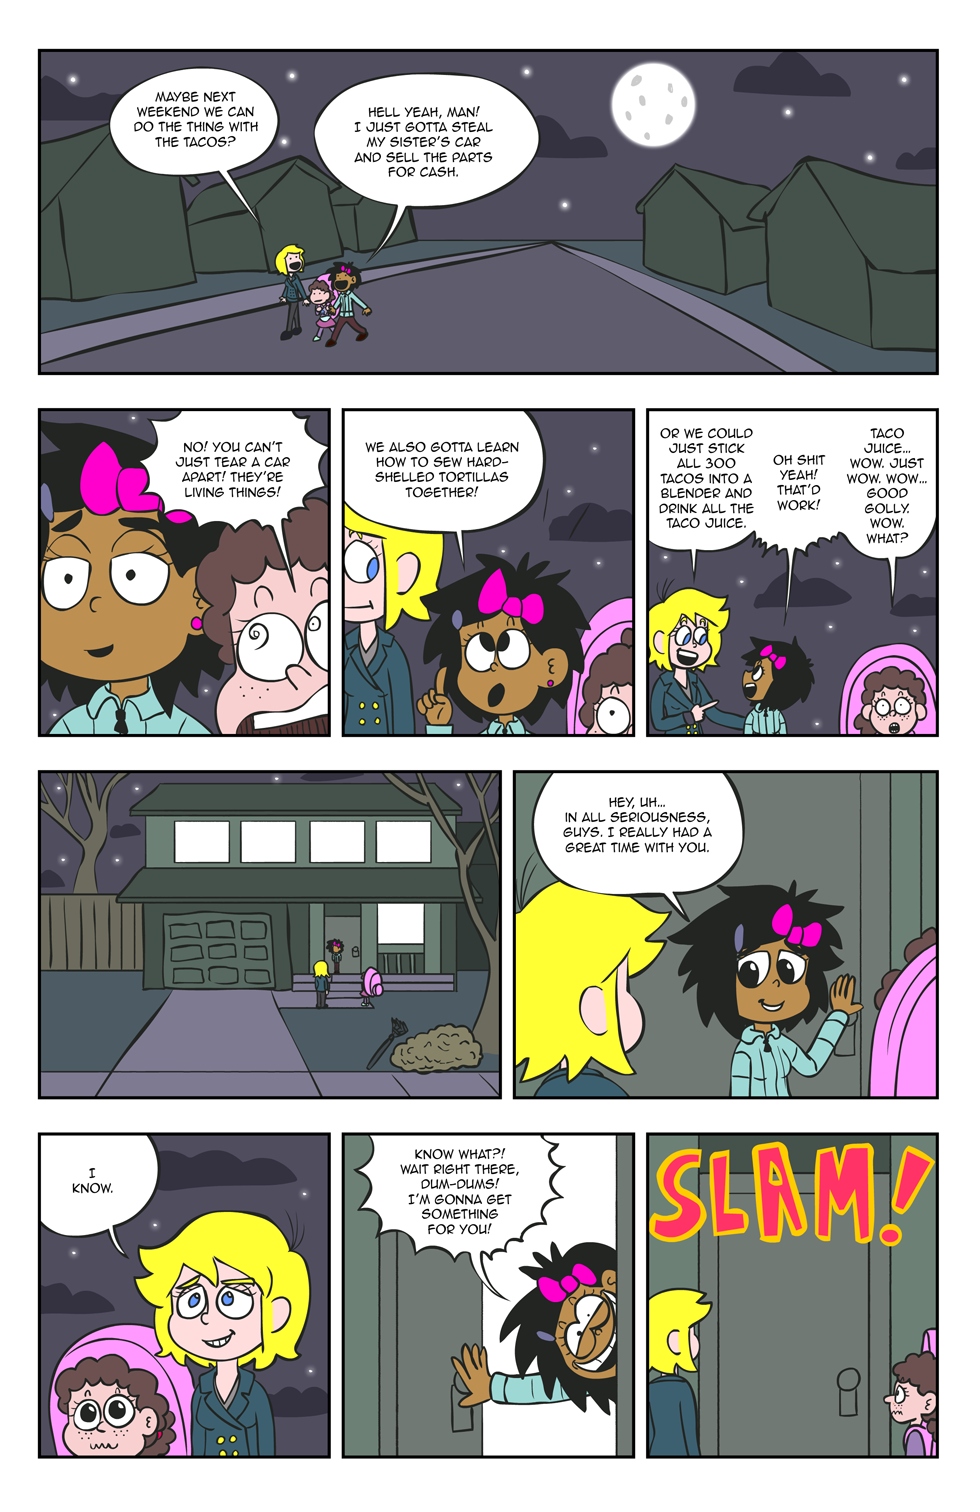 041: Don’t Pull Your Love – Page 3/5